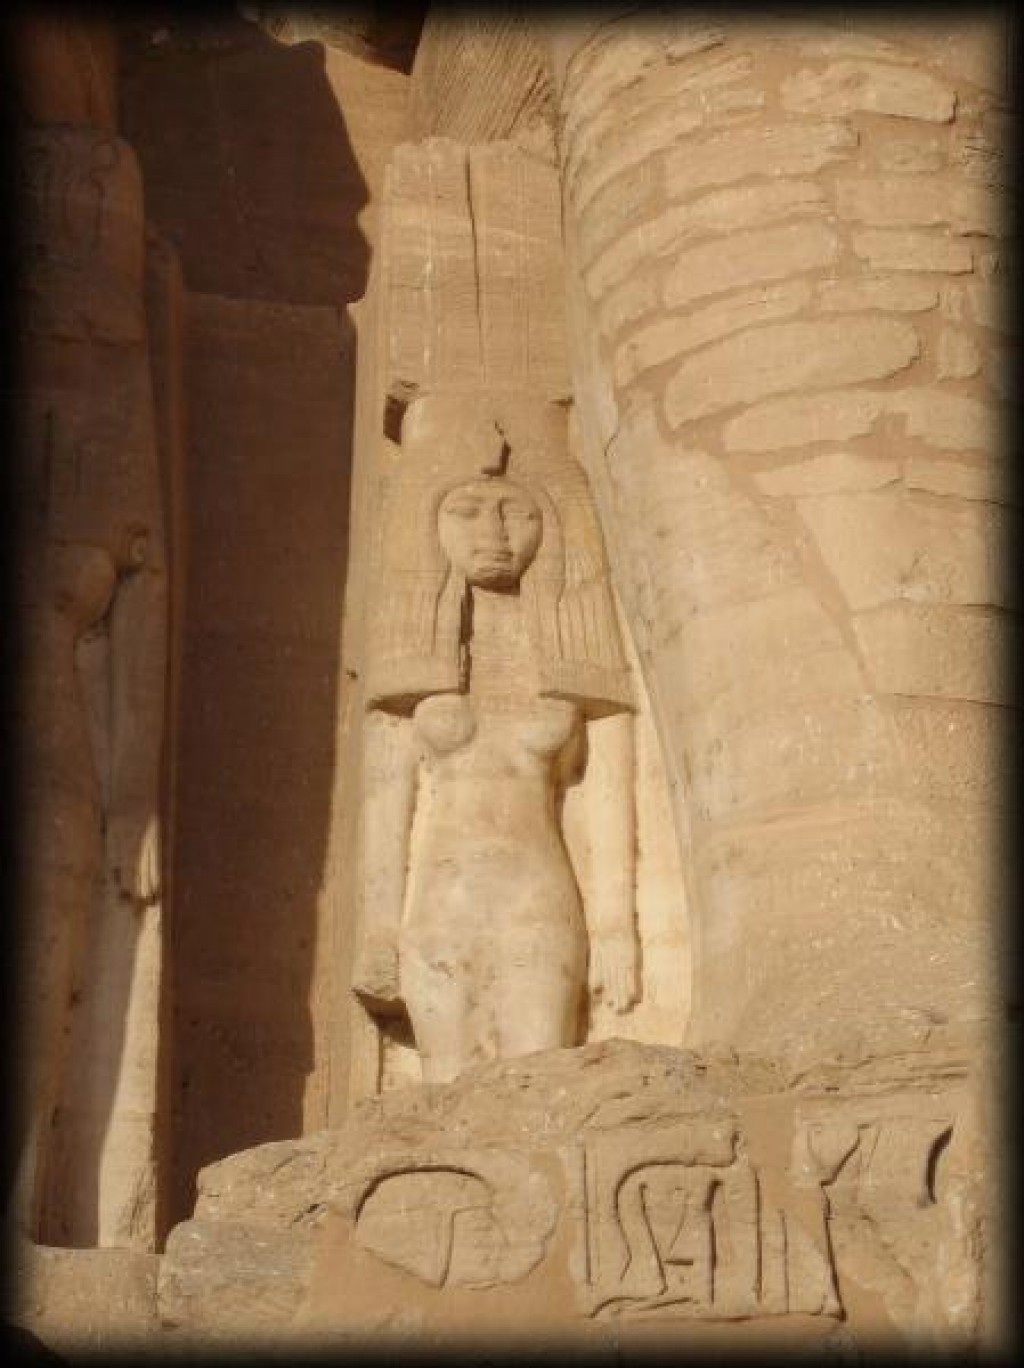 A highlight of our trip was visiting Abu Simbel in the south of Egypt